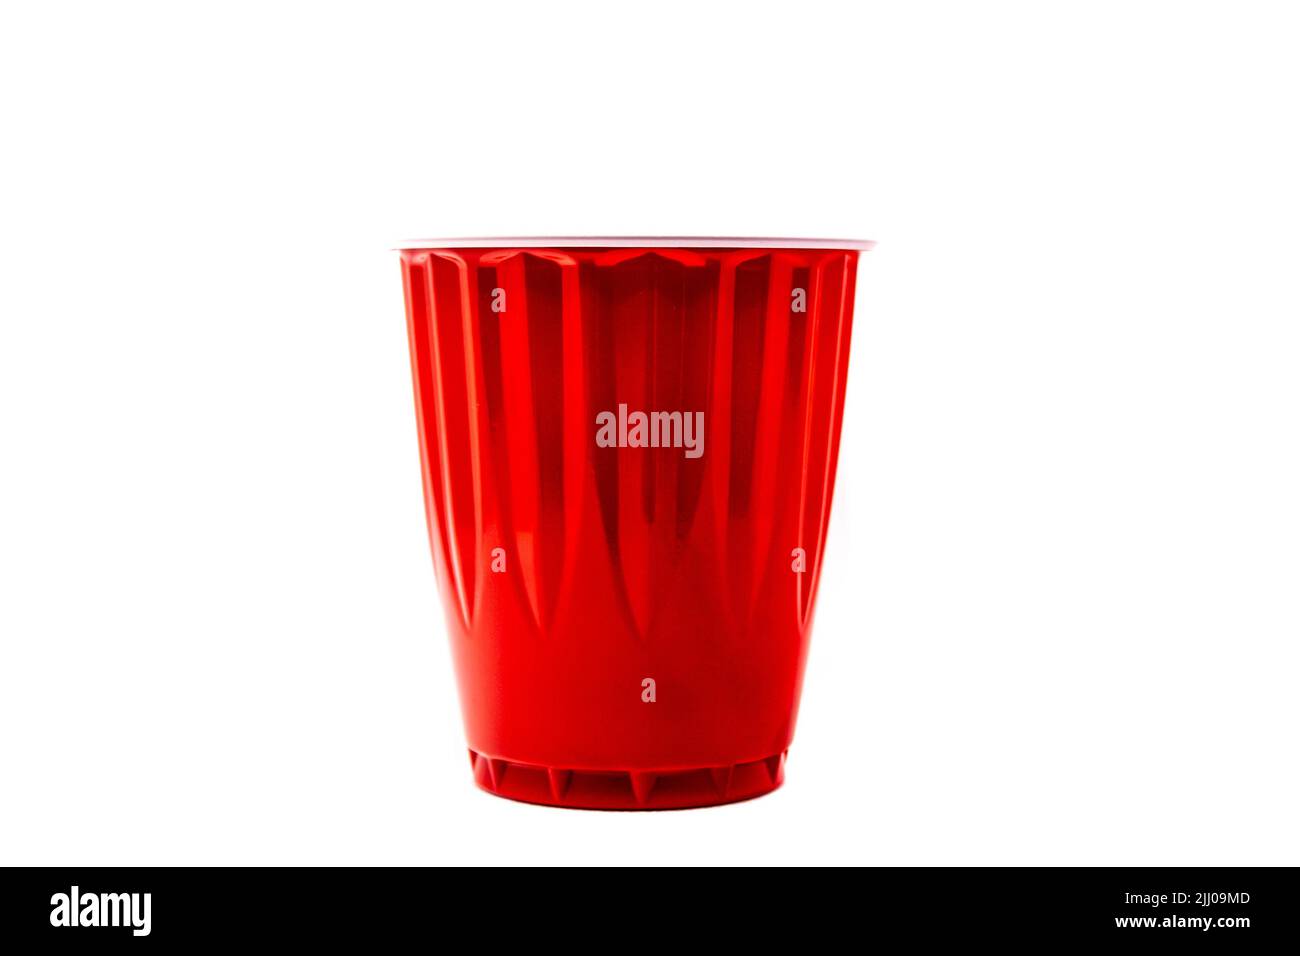 https://c8.alamy.com/comp/2JJ09MD/a-red-plastic-cup-isolated-on-a-white-background-2JJ09MD.jpg